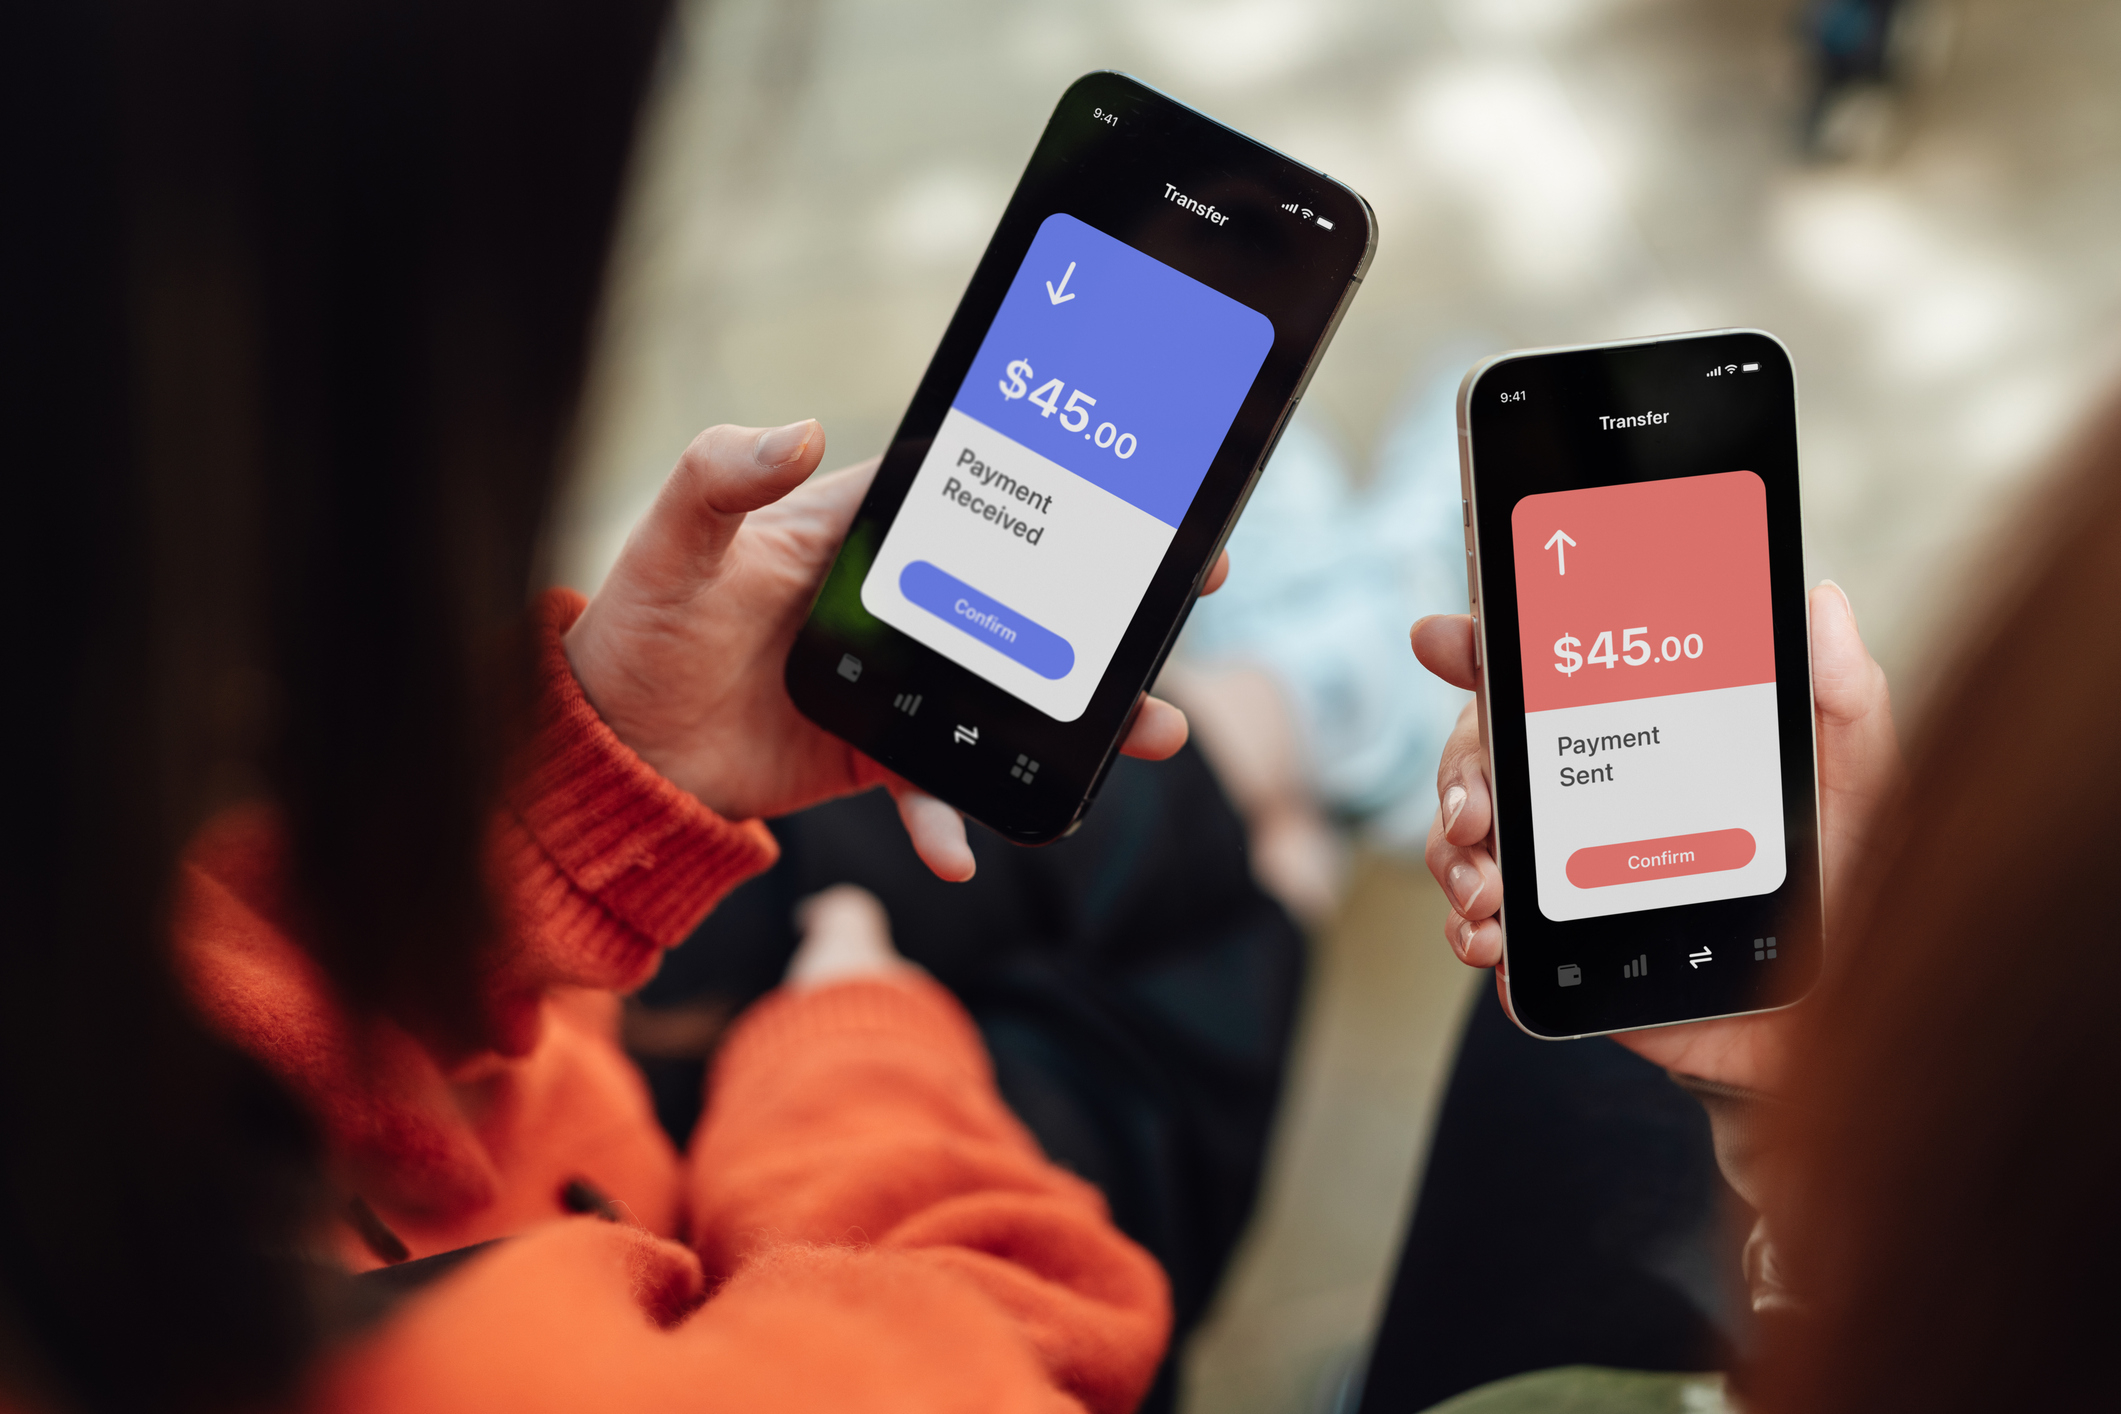 Two hands holding smartphones, screens showing a $45 payment sent and received via a mobile app